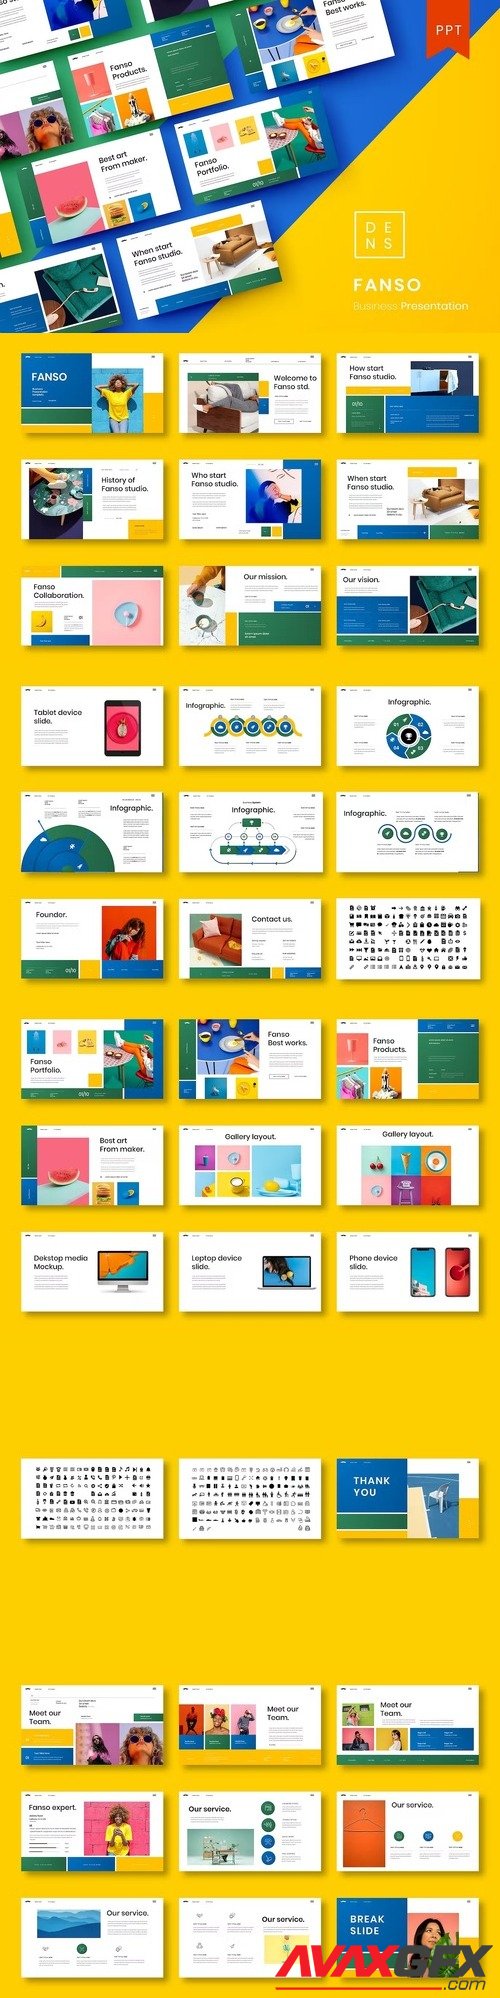 Fanso – Business PowerPoint Template [PPTX]